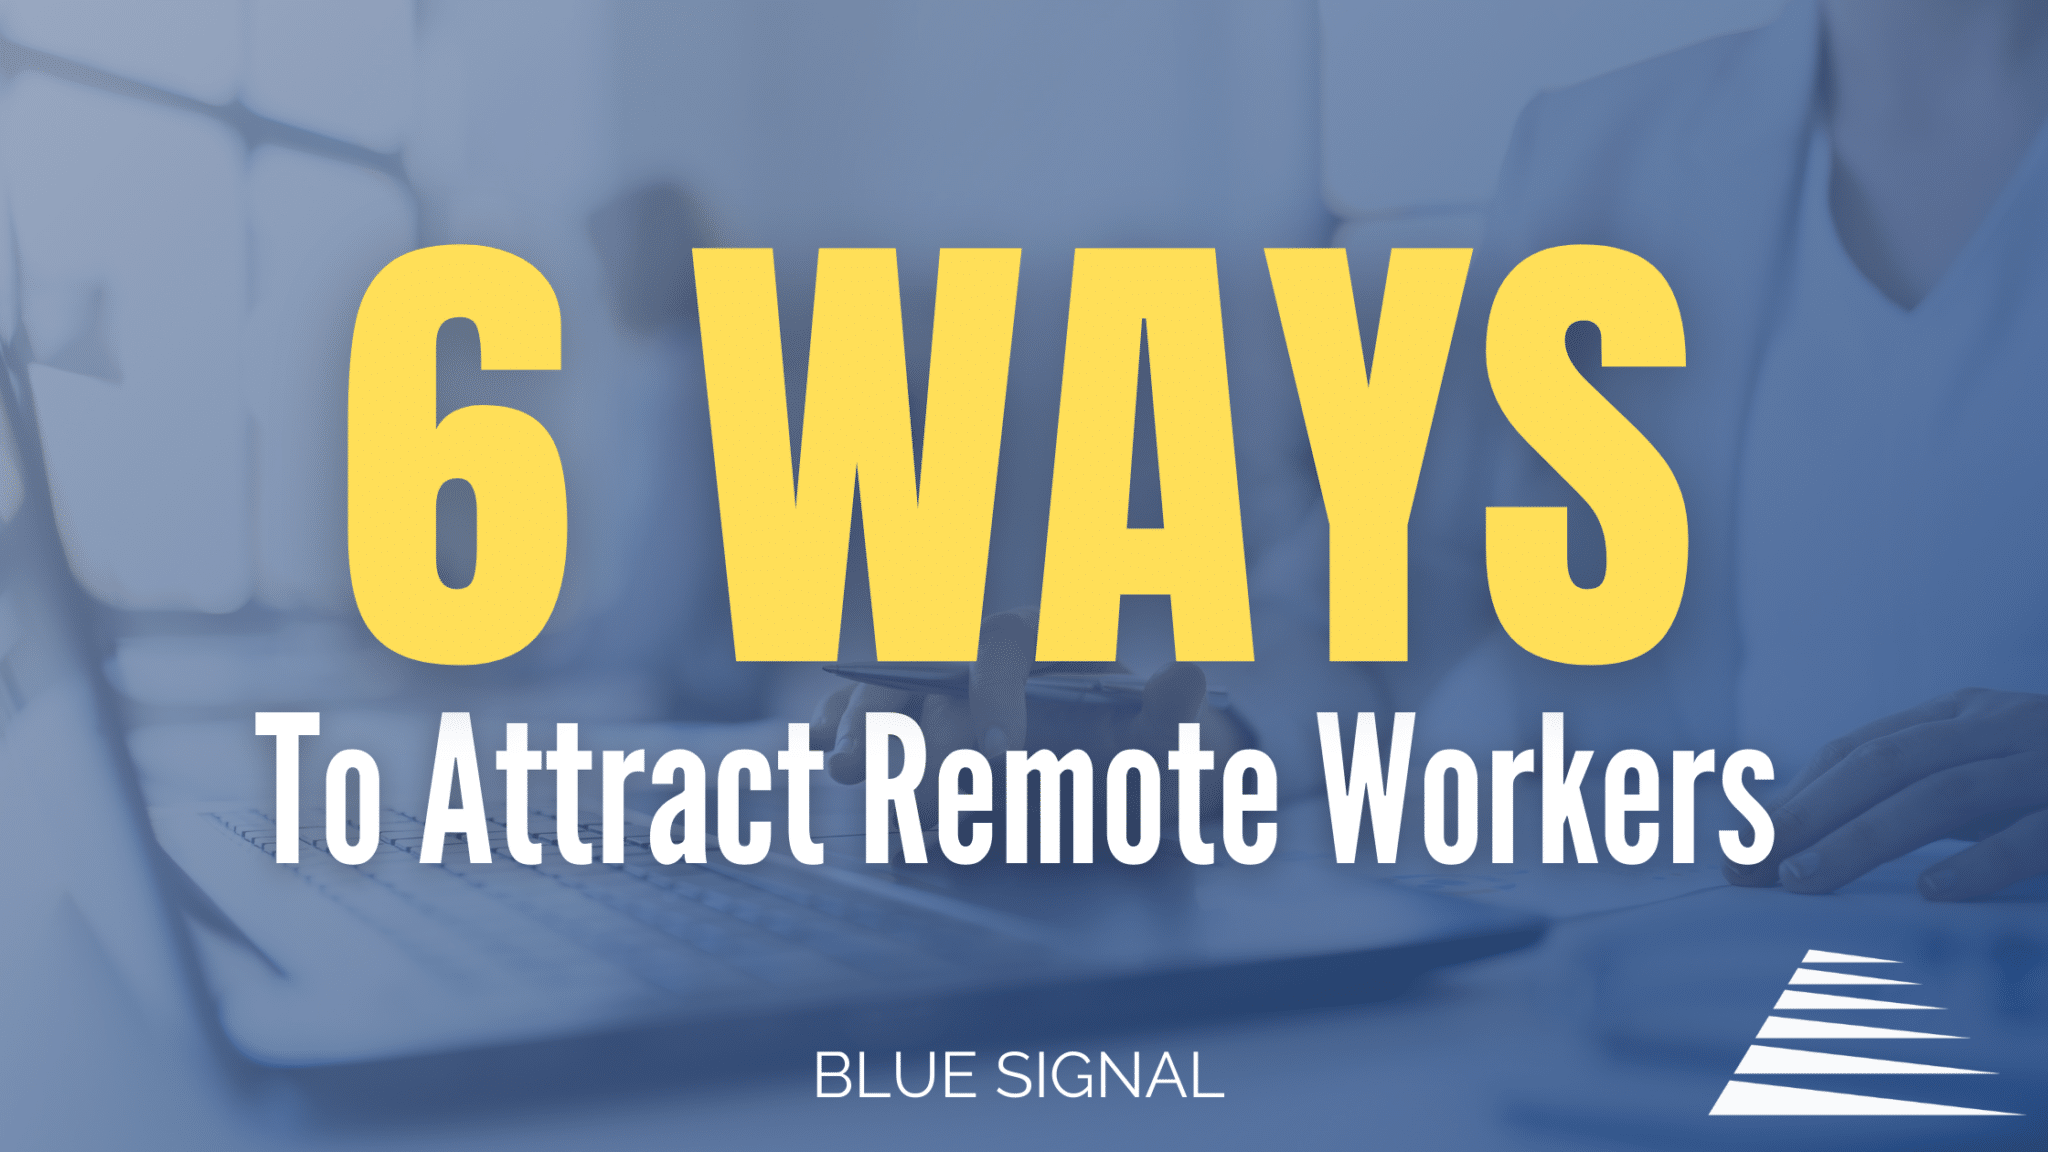 Blog cover graphic showing "6 WAYS" in yellow font, with "To Attract Remote Workers" below it. The background image is a person working on a laptop